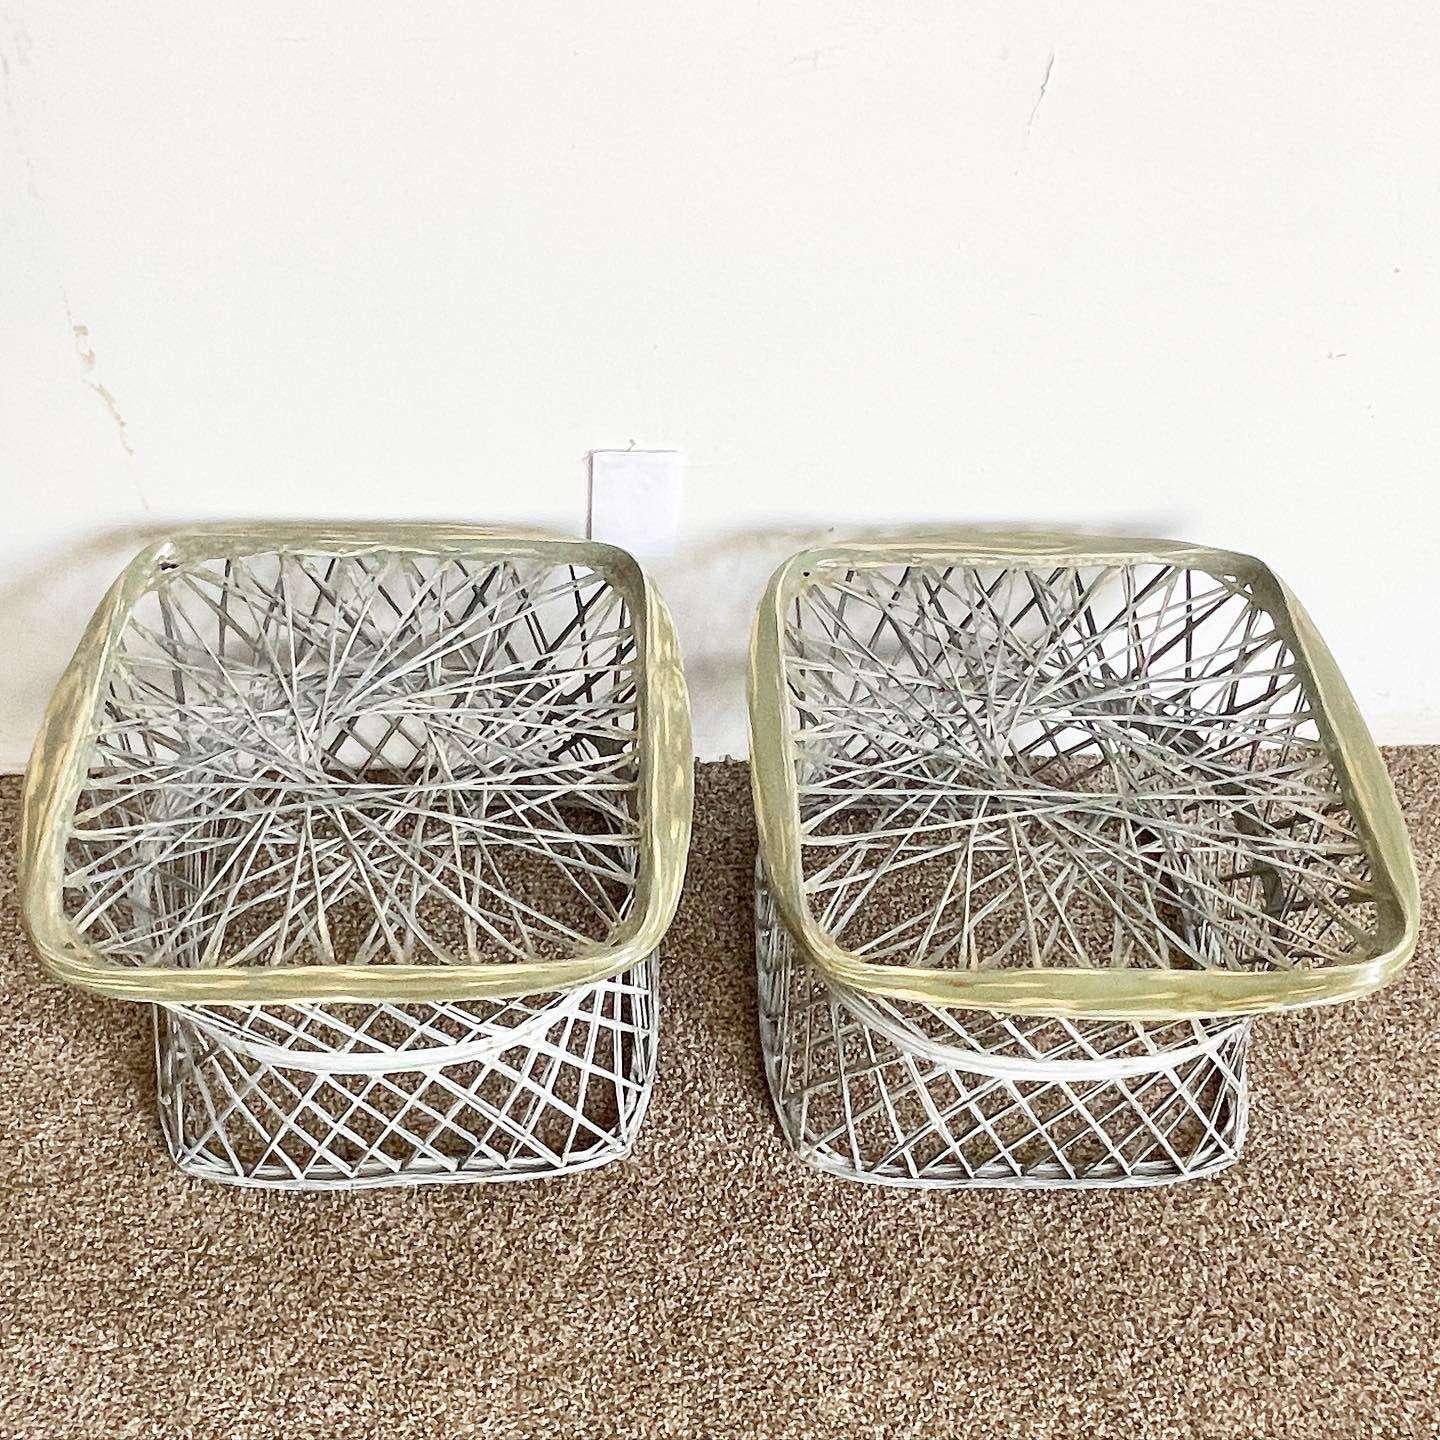 Glass Russell Woodard Spun Fiberglass Lounge Chairs With Ottomans and Side Tables For Sale